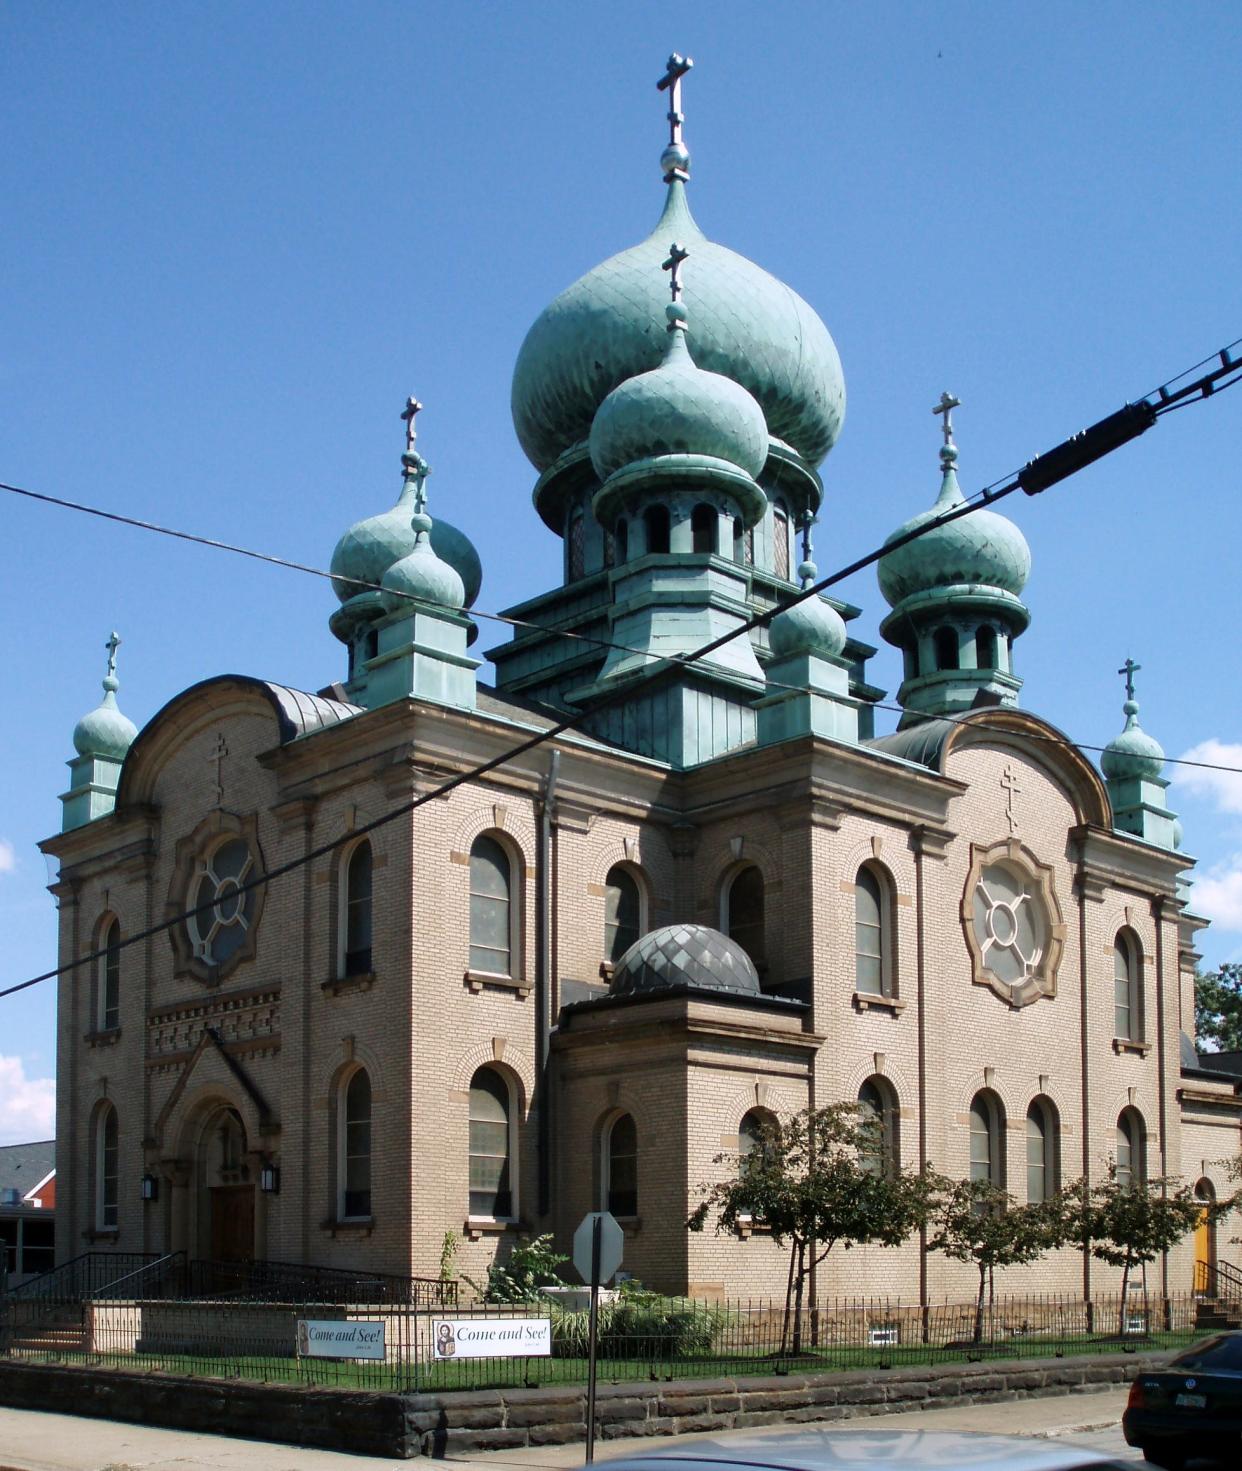 The distinctive St. Theodosius Orthodox Cathedral in the Tremont neighborhood of Cleveland was featured in the 1978 film “The Deer Hunter.”